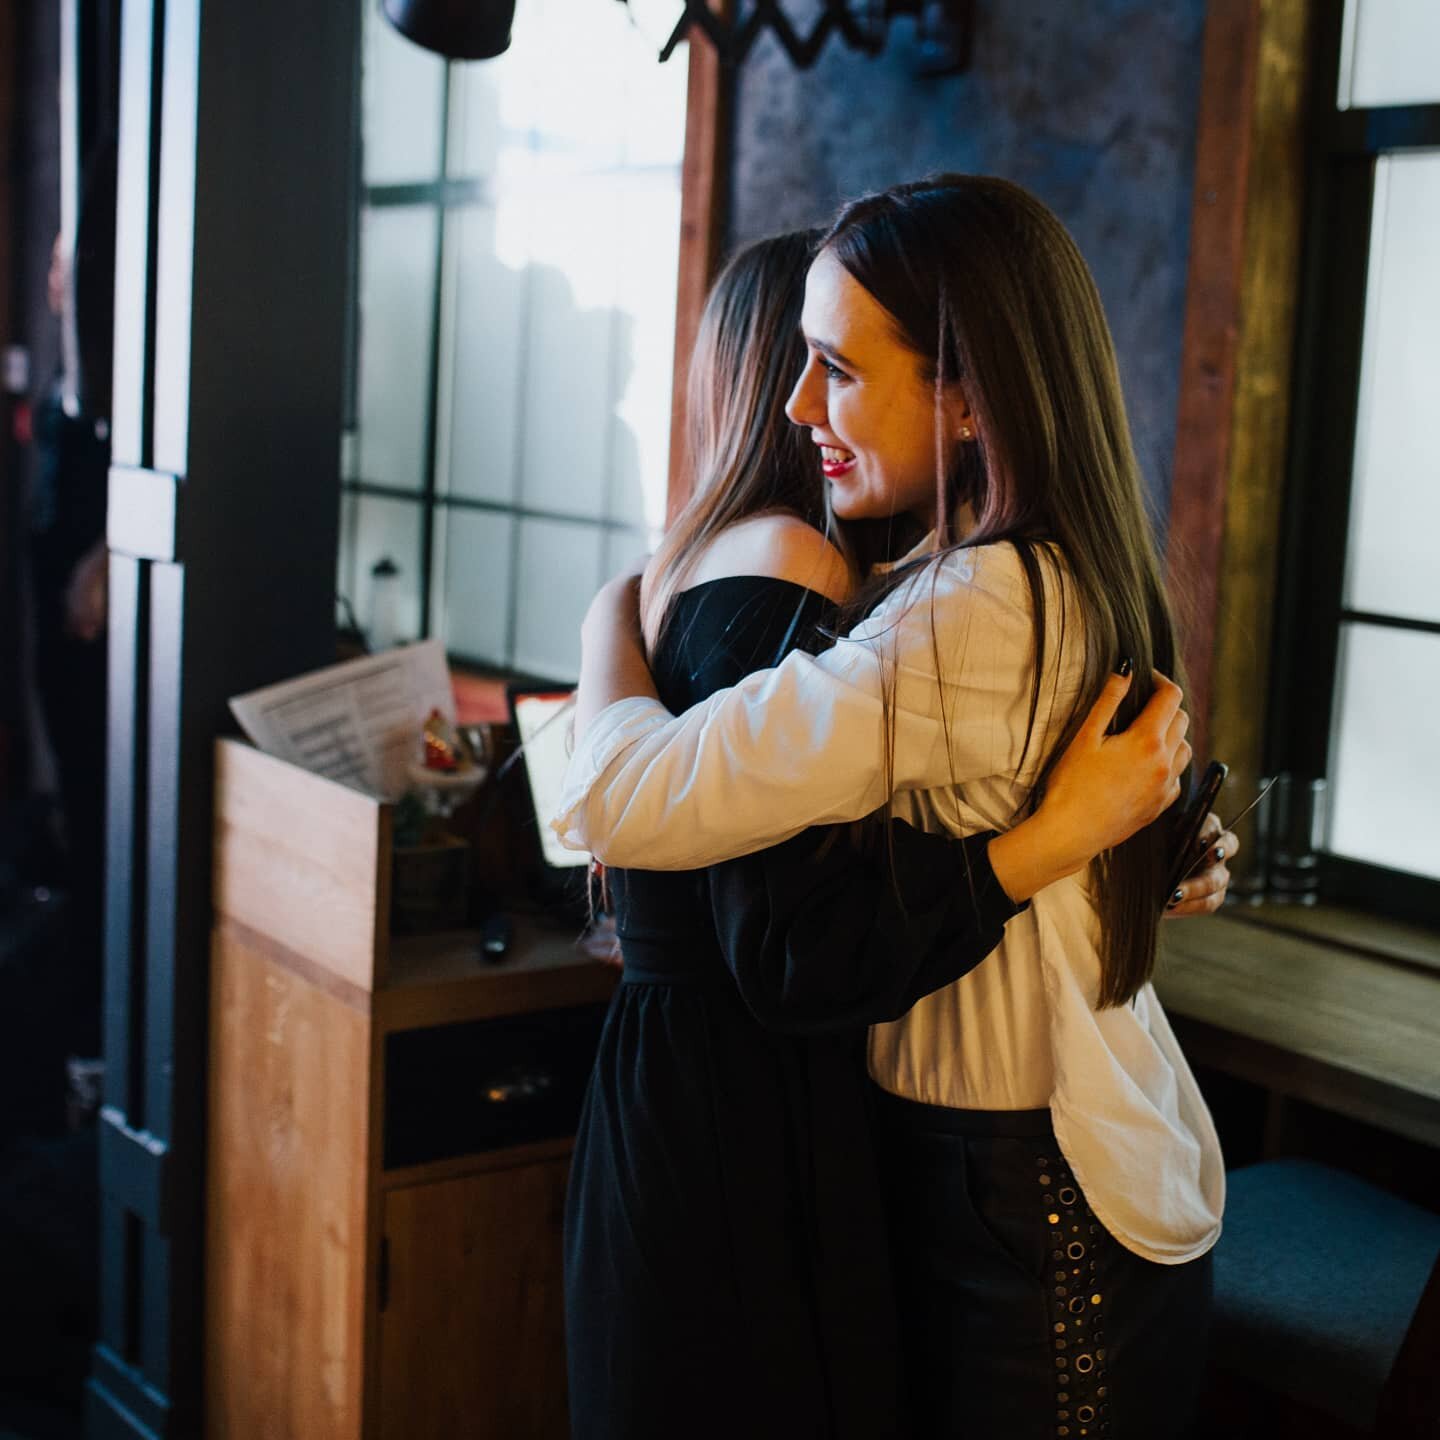 Happy Hugging Day! 🤗

We all miss those warm hugs, which connects us and builds trust, but safety is more important now, so we continue practicing virtual hugs for a while.

How are you expressing your love and care during these tough times? 🤔

#hu